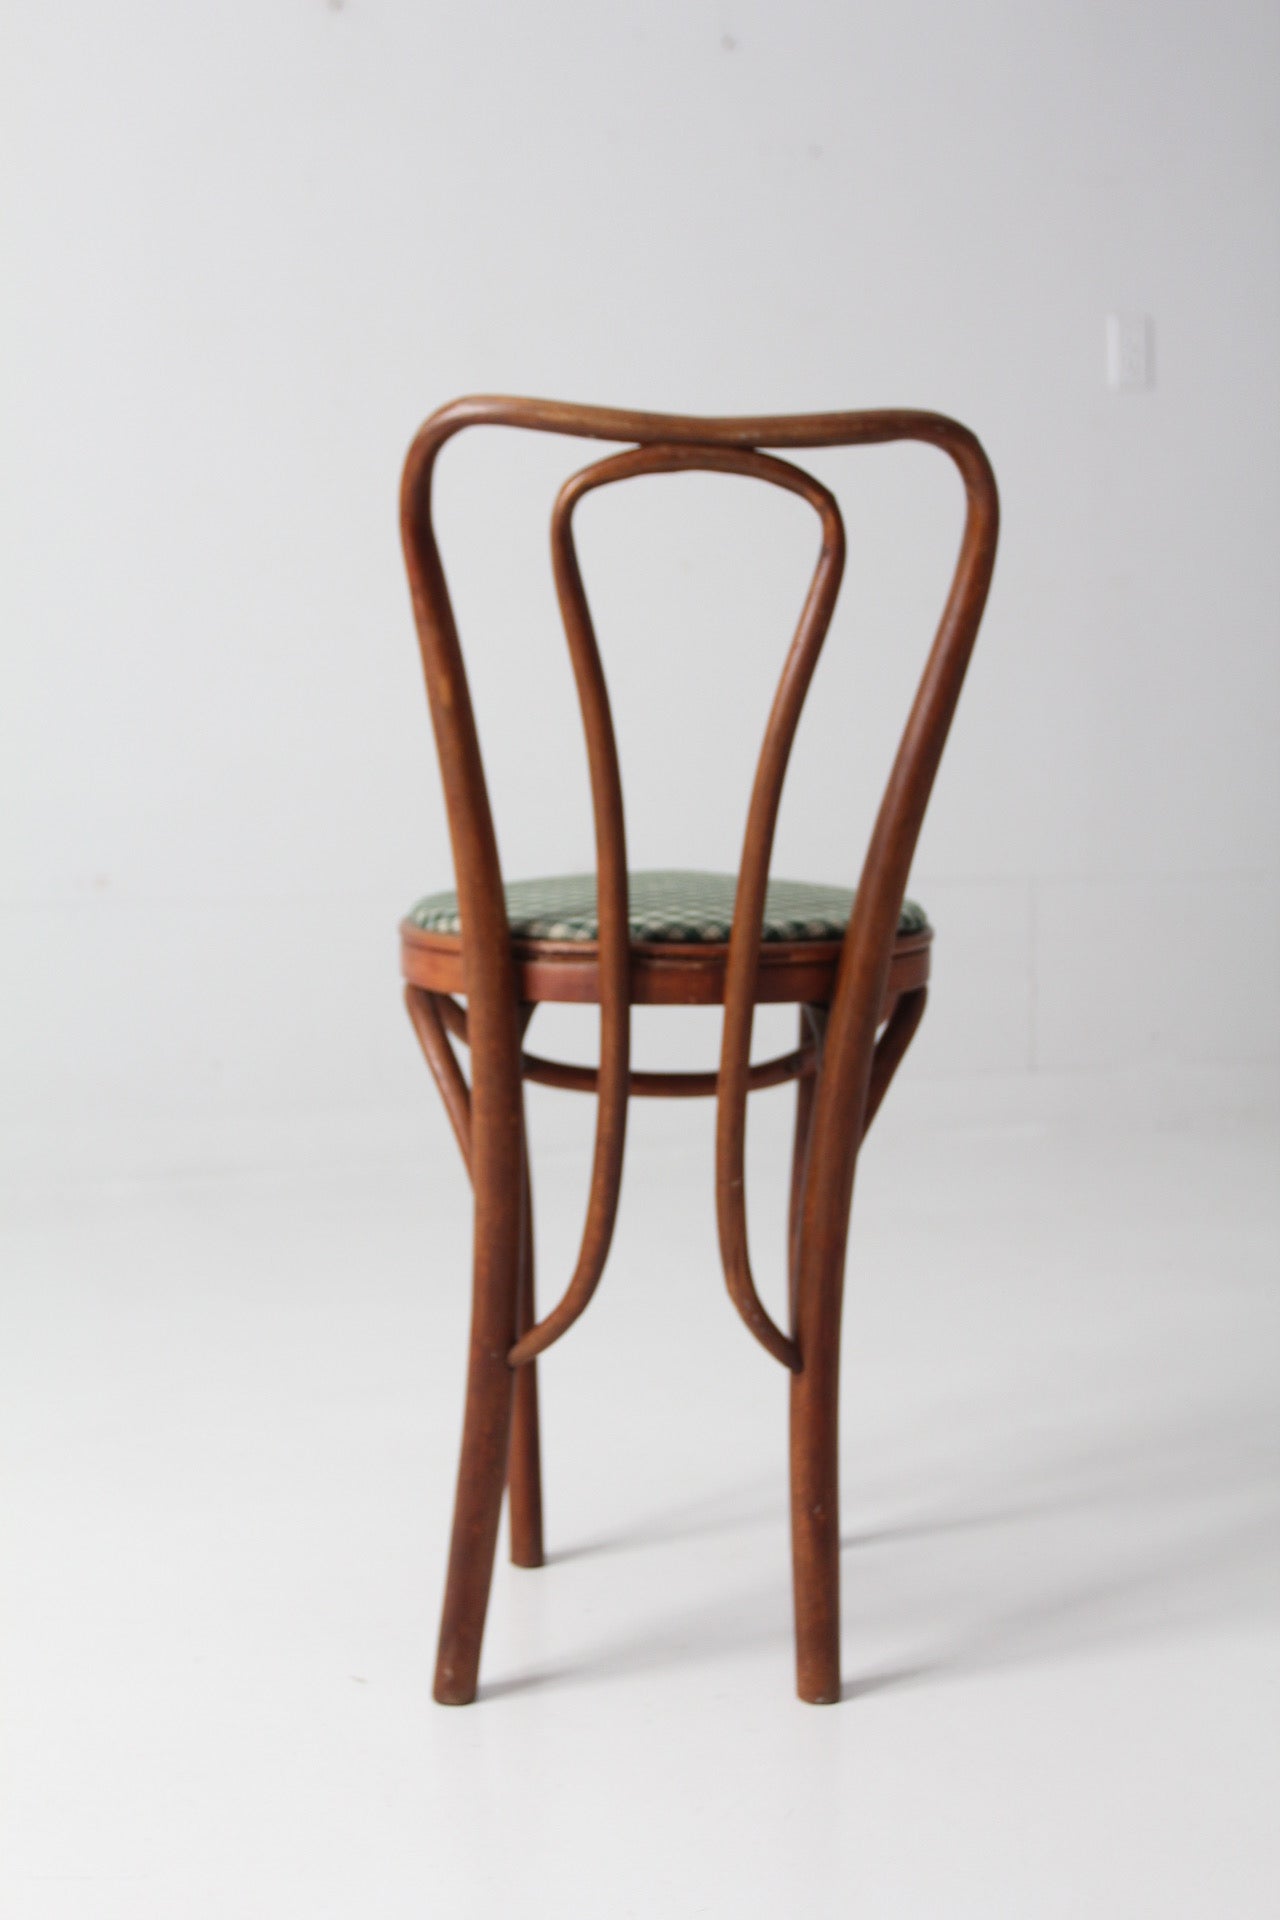 antique bentwood chair with upholstered seat